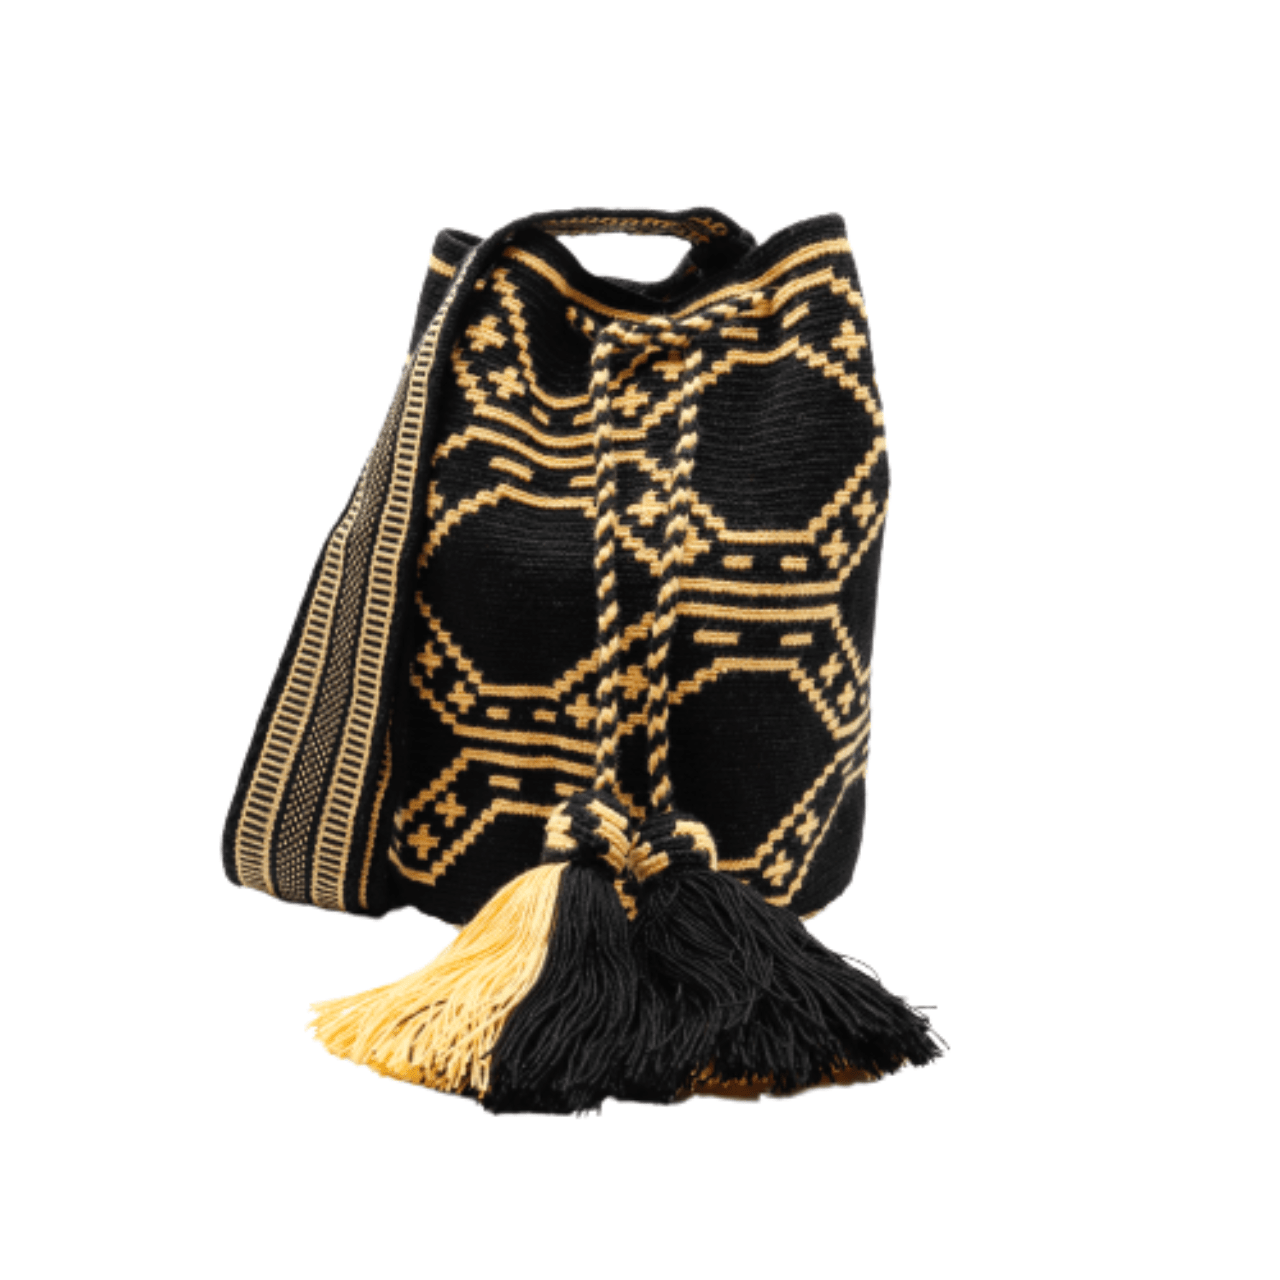 Jime Wayuu Bag - Vanilla and Black Color Blend - Bold Design - Handcrafted Beauty and Stylish Elegance